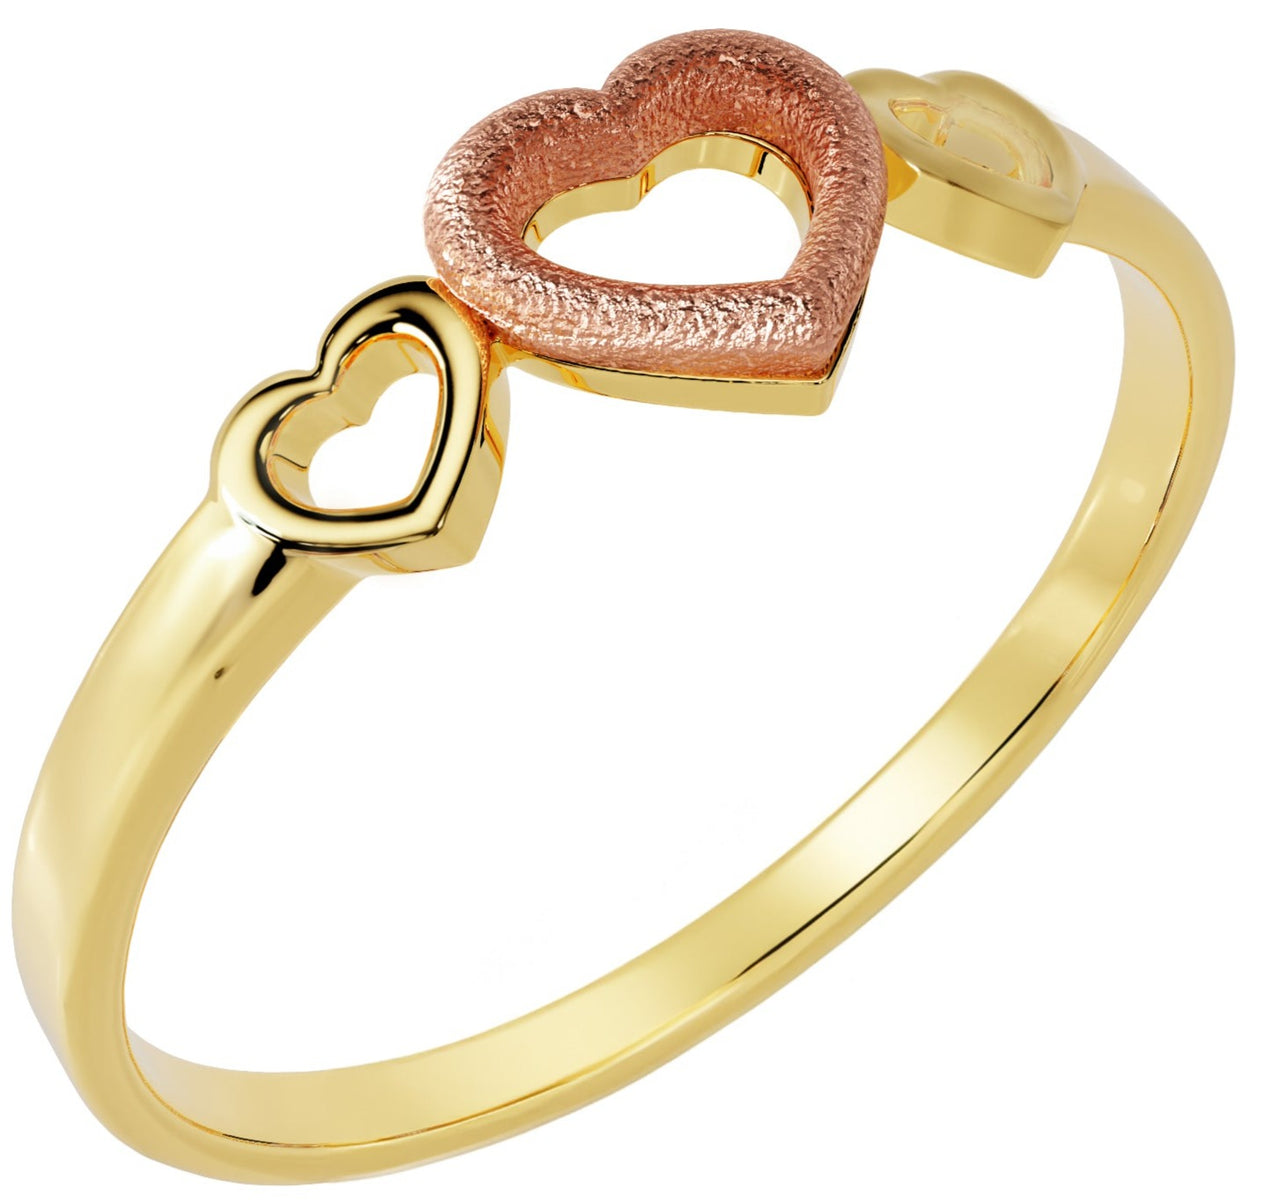 Ladies 14K Yellow and Rose Gold Triple Heart Ring